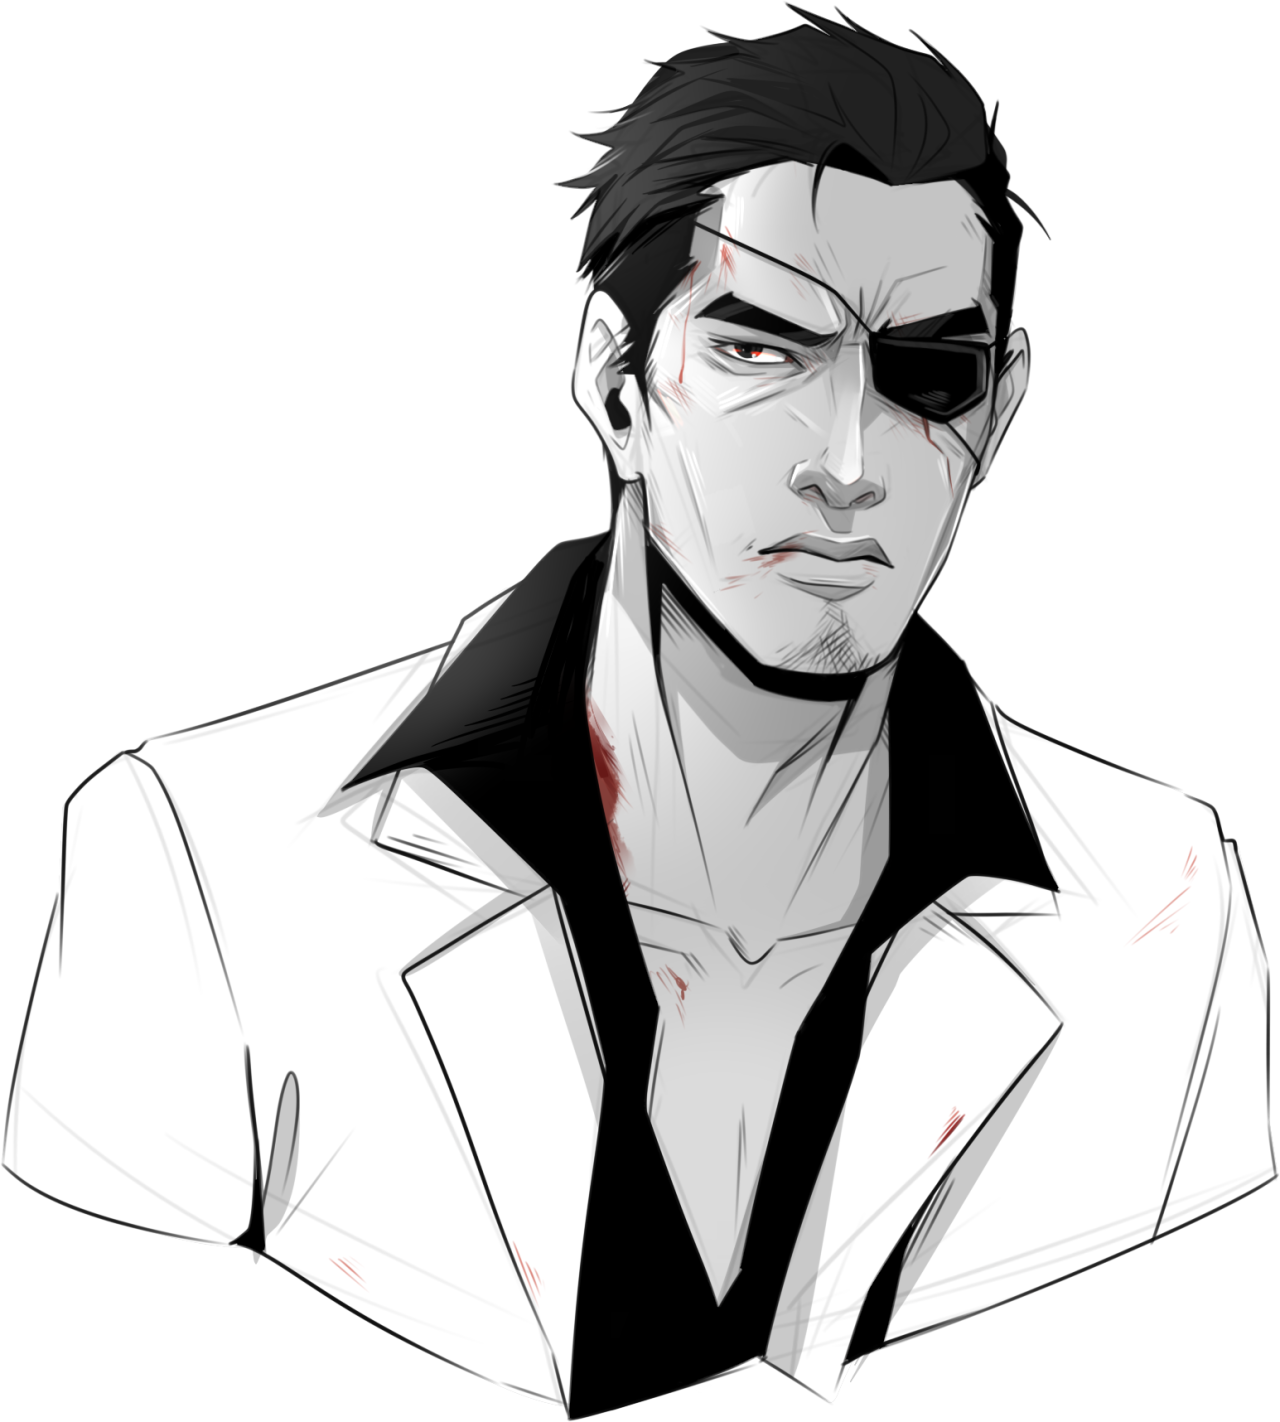 saltandbees:WOKE UP TO THE GREATEST CHRISTMAS GIFT POSSIBLE FROM MY BFF @istehlurvz !!!!!She drew Kiryu from my fic and him lookin so fine 😭💕 so go follow Sam and go read my fic and be destroyed with emotions by this fucking amazing art akpfpfpfpfffpo